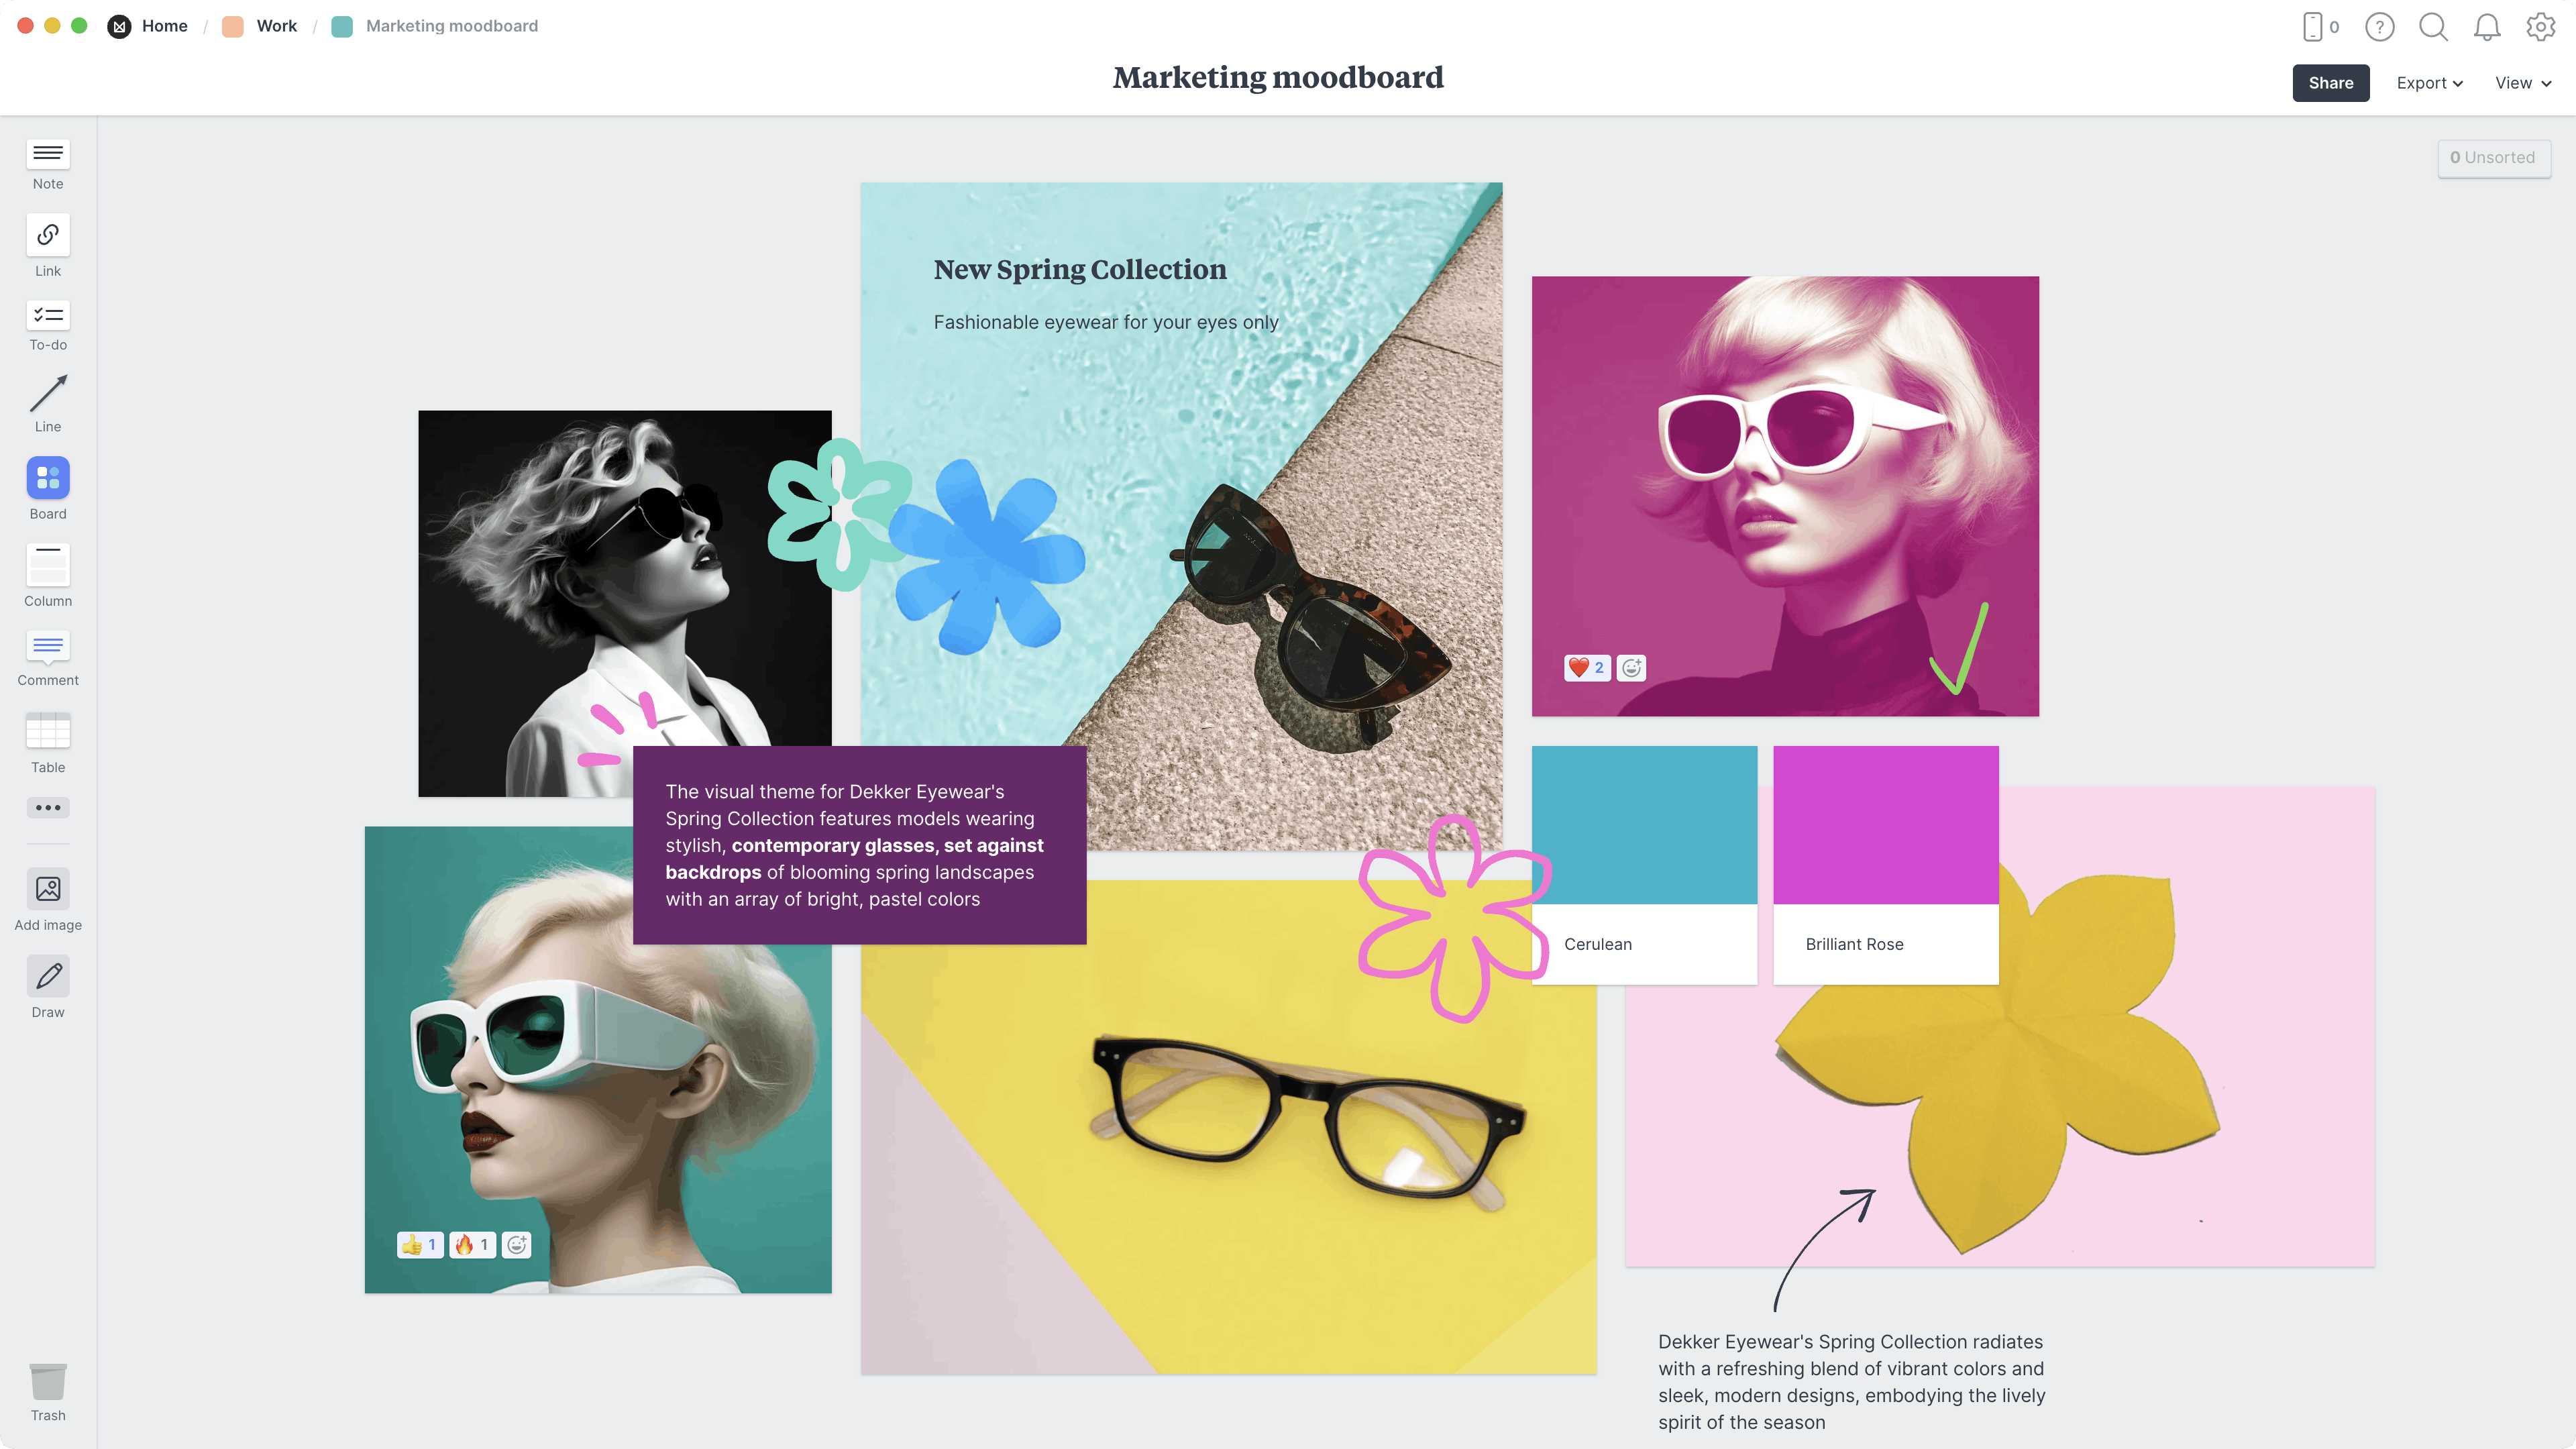 A Milanote moodboard showing various inspiring images, colours and notes that convey the idea behind a marketing campaign.